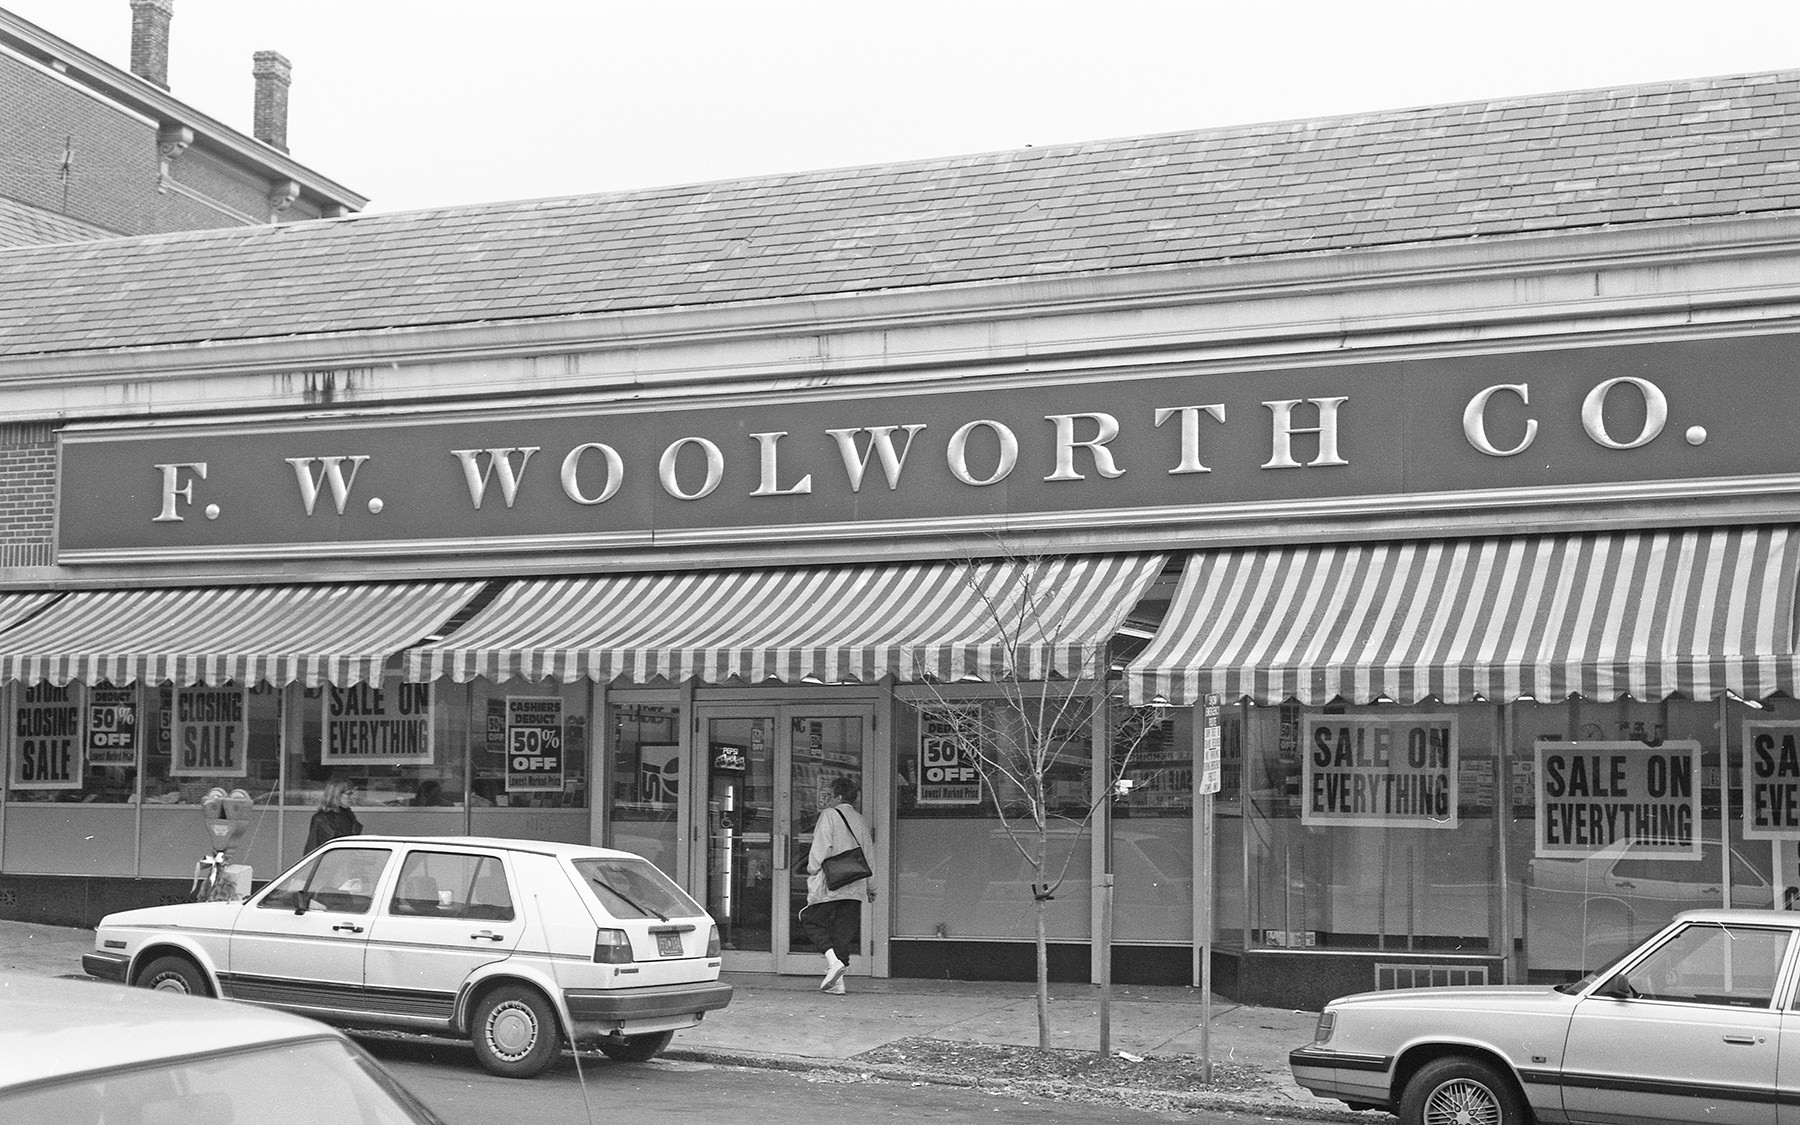 Woolworth’s storefront